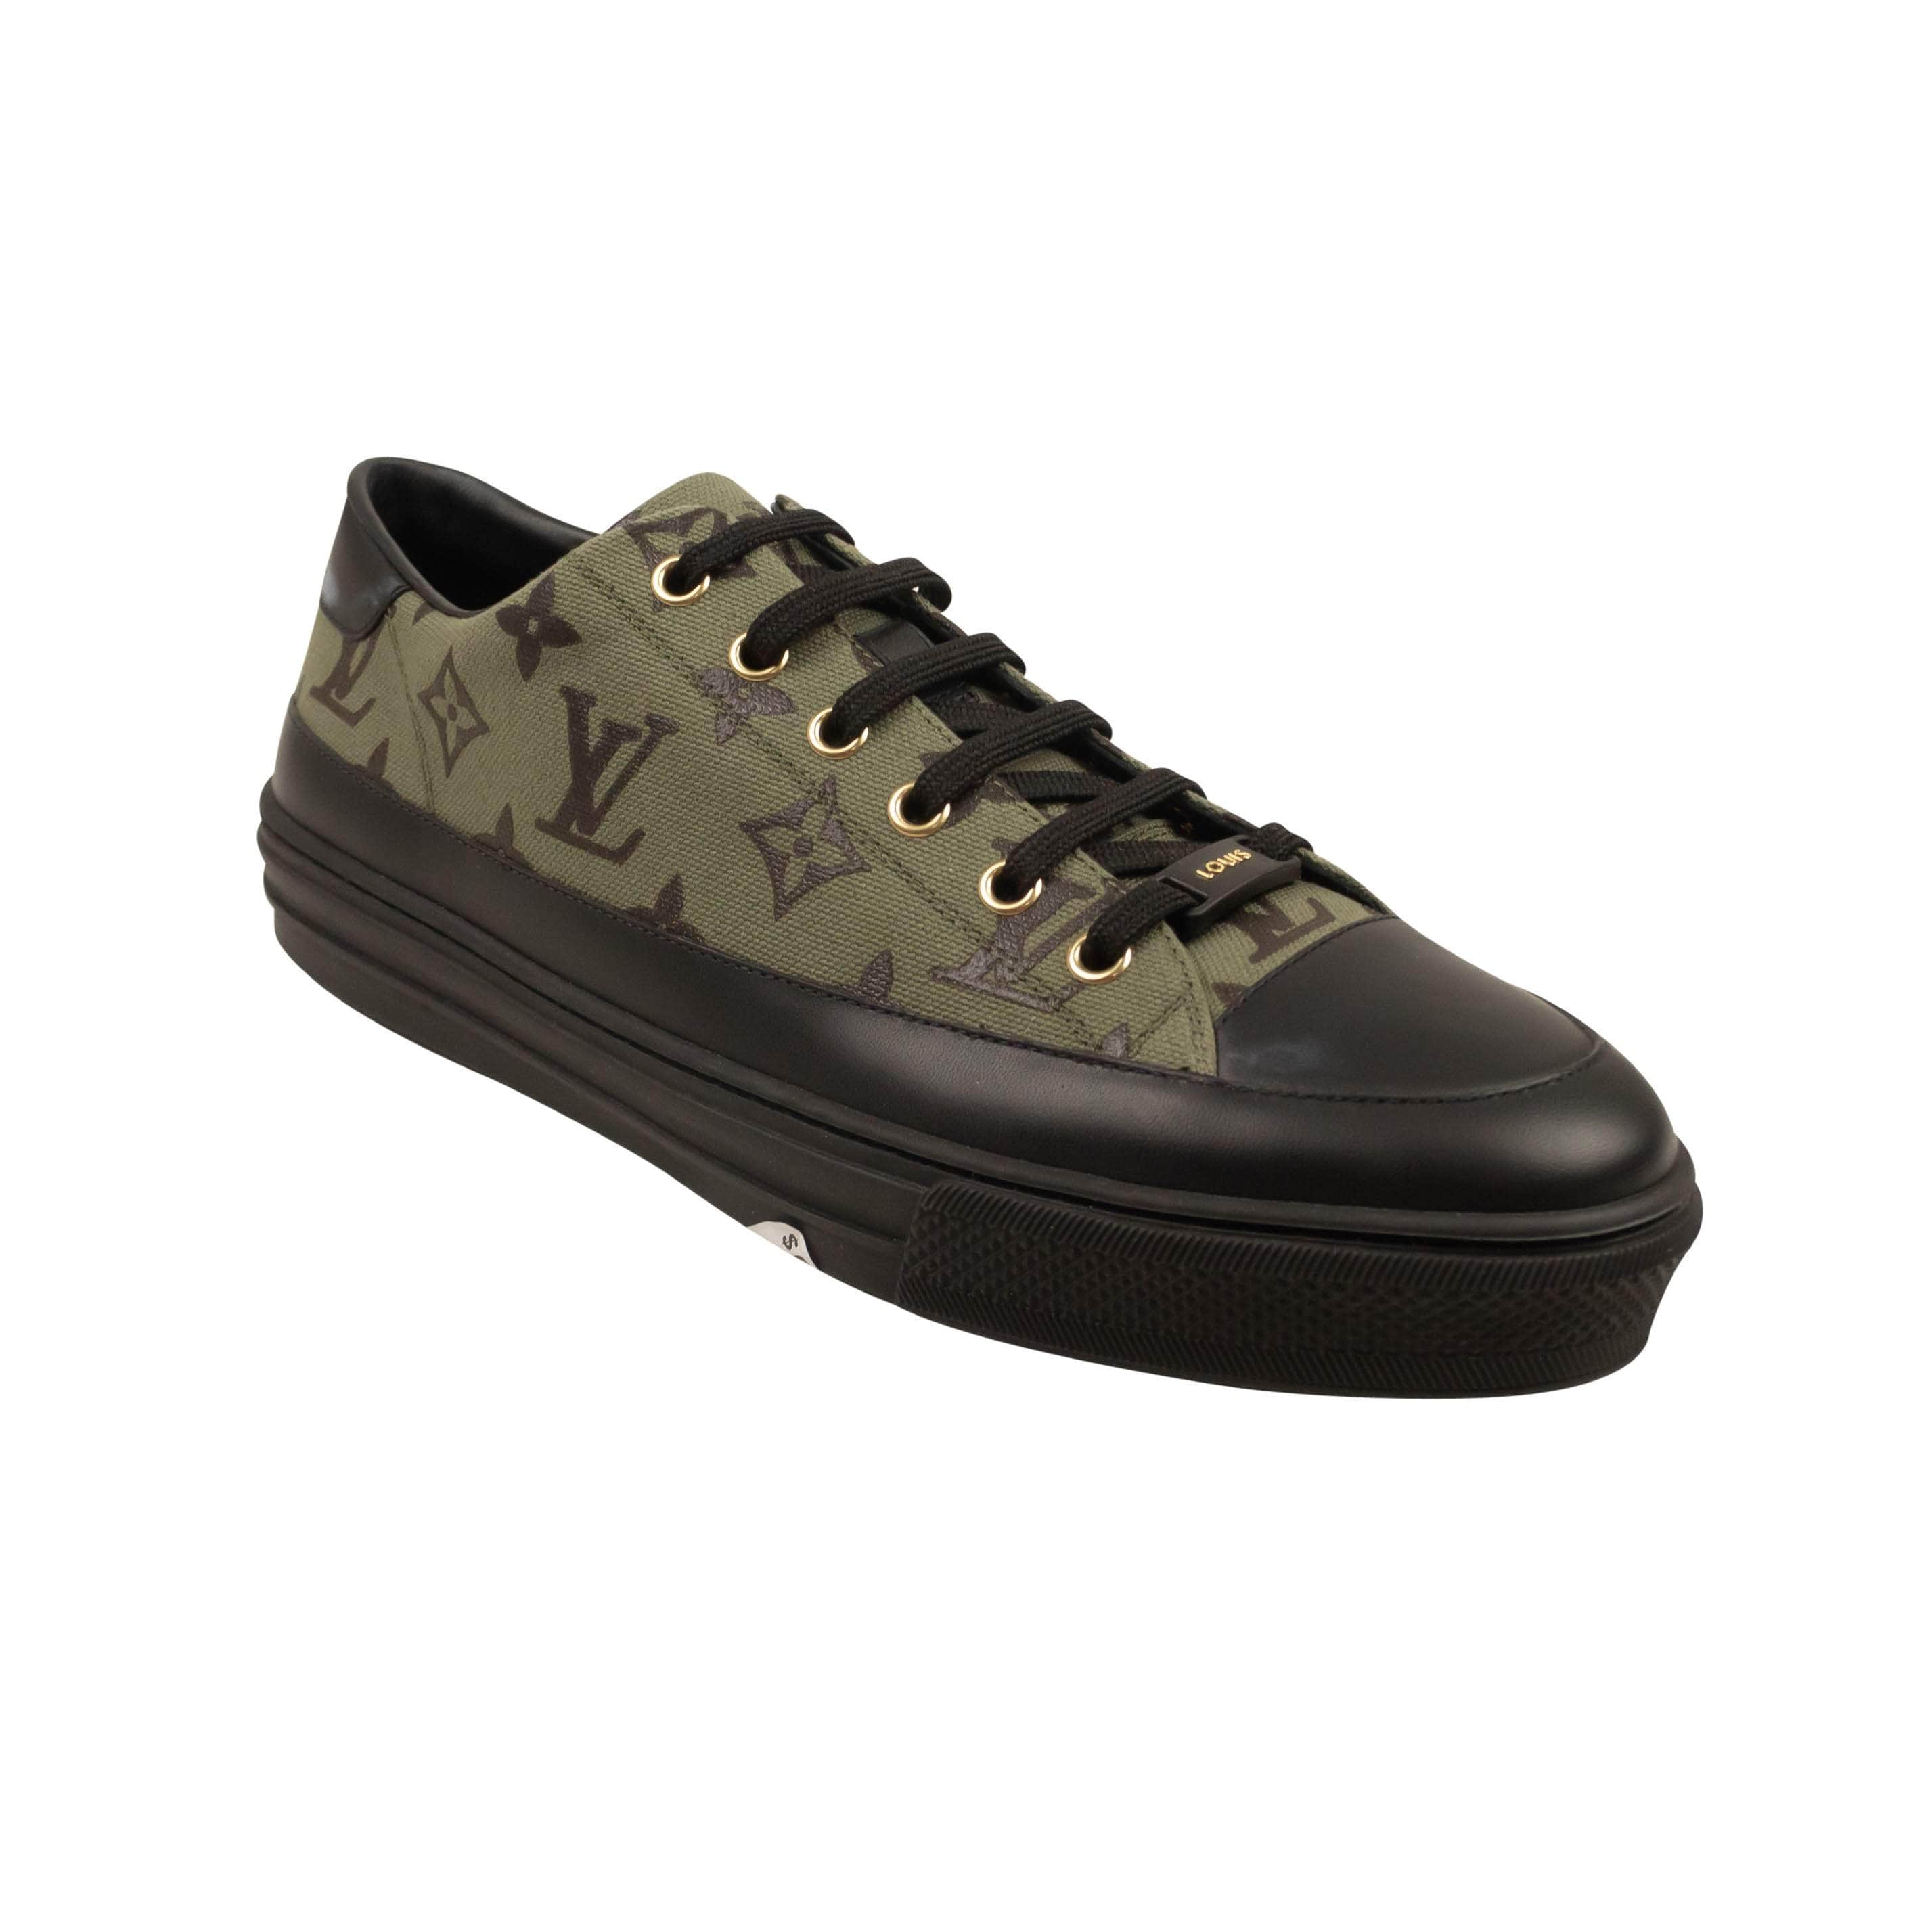 Louis Vuitton 500-750, channelenable-all, chicmi, couponcollection, gender-womens, main-shoes, size-40-5, SPO, stadiumgoods 40.5 Green Stellar Low Top No Box Sneakers 95-LVT-2020/40.5 95-LVT-2020/40.5